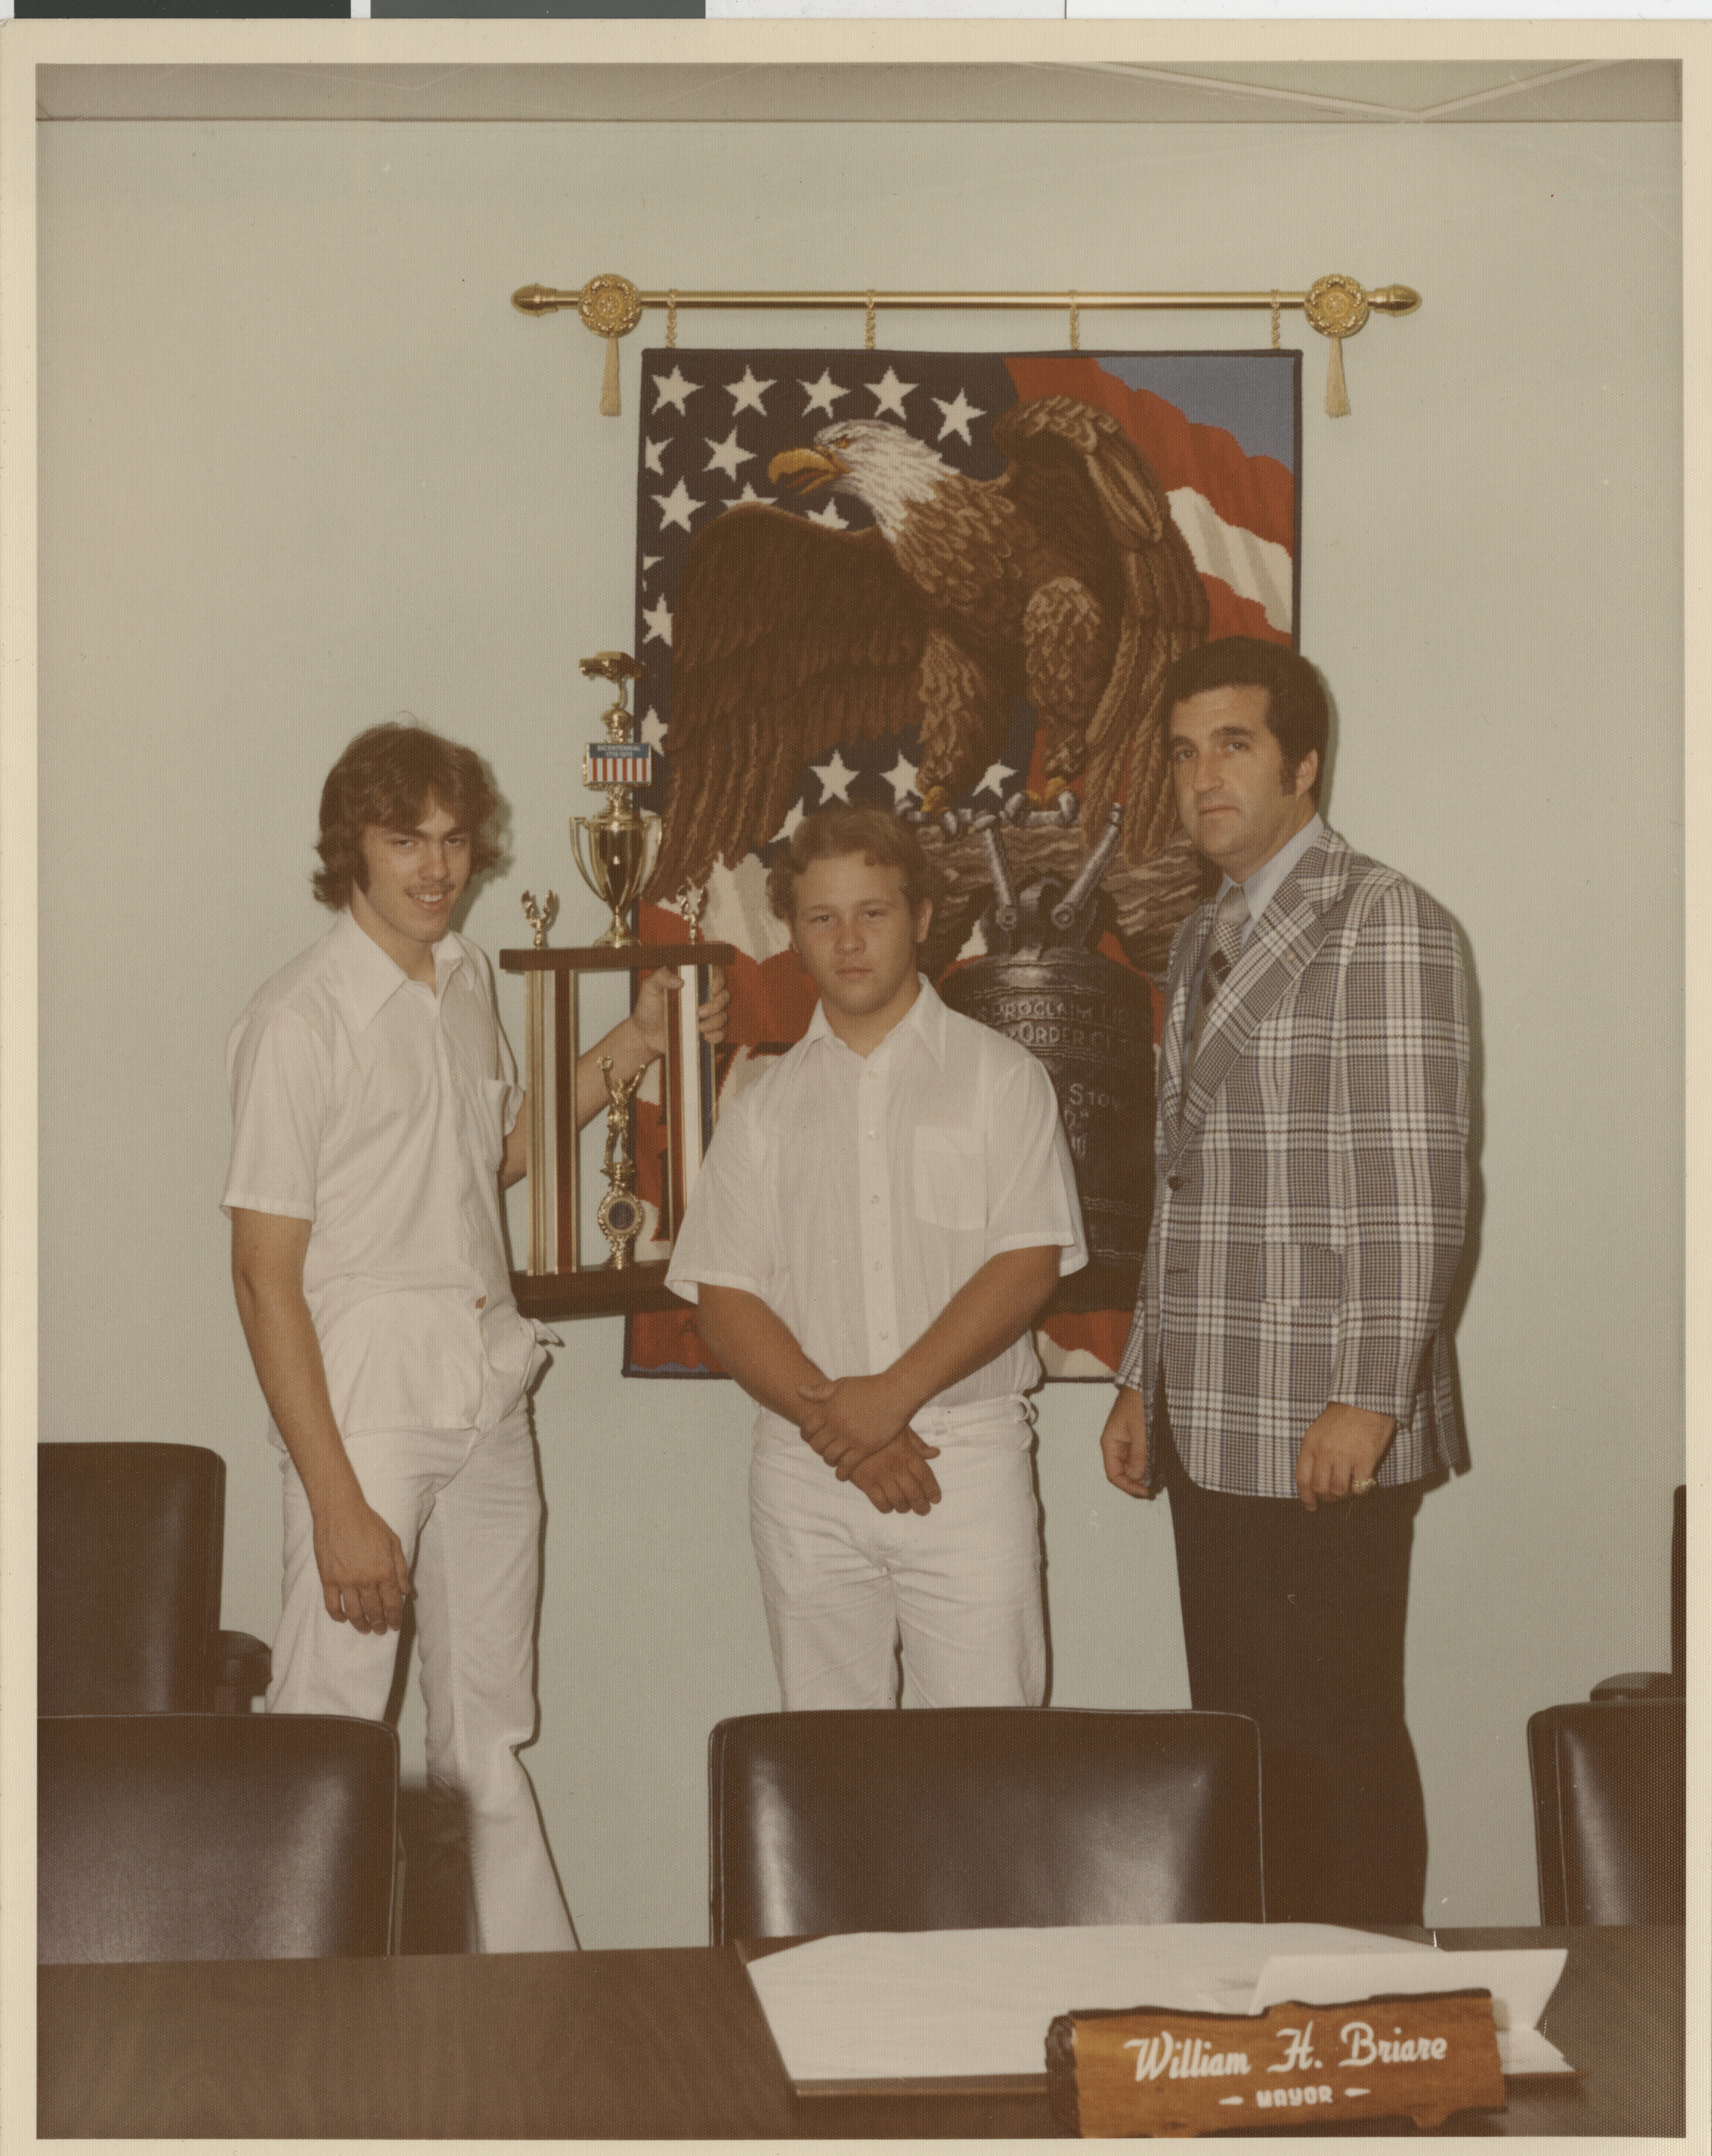 Photograph of Ron Lurie with two young men holding a trophy at the desk of Mayor Bill Briare